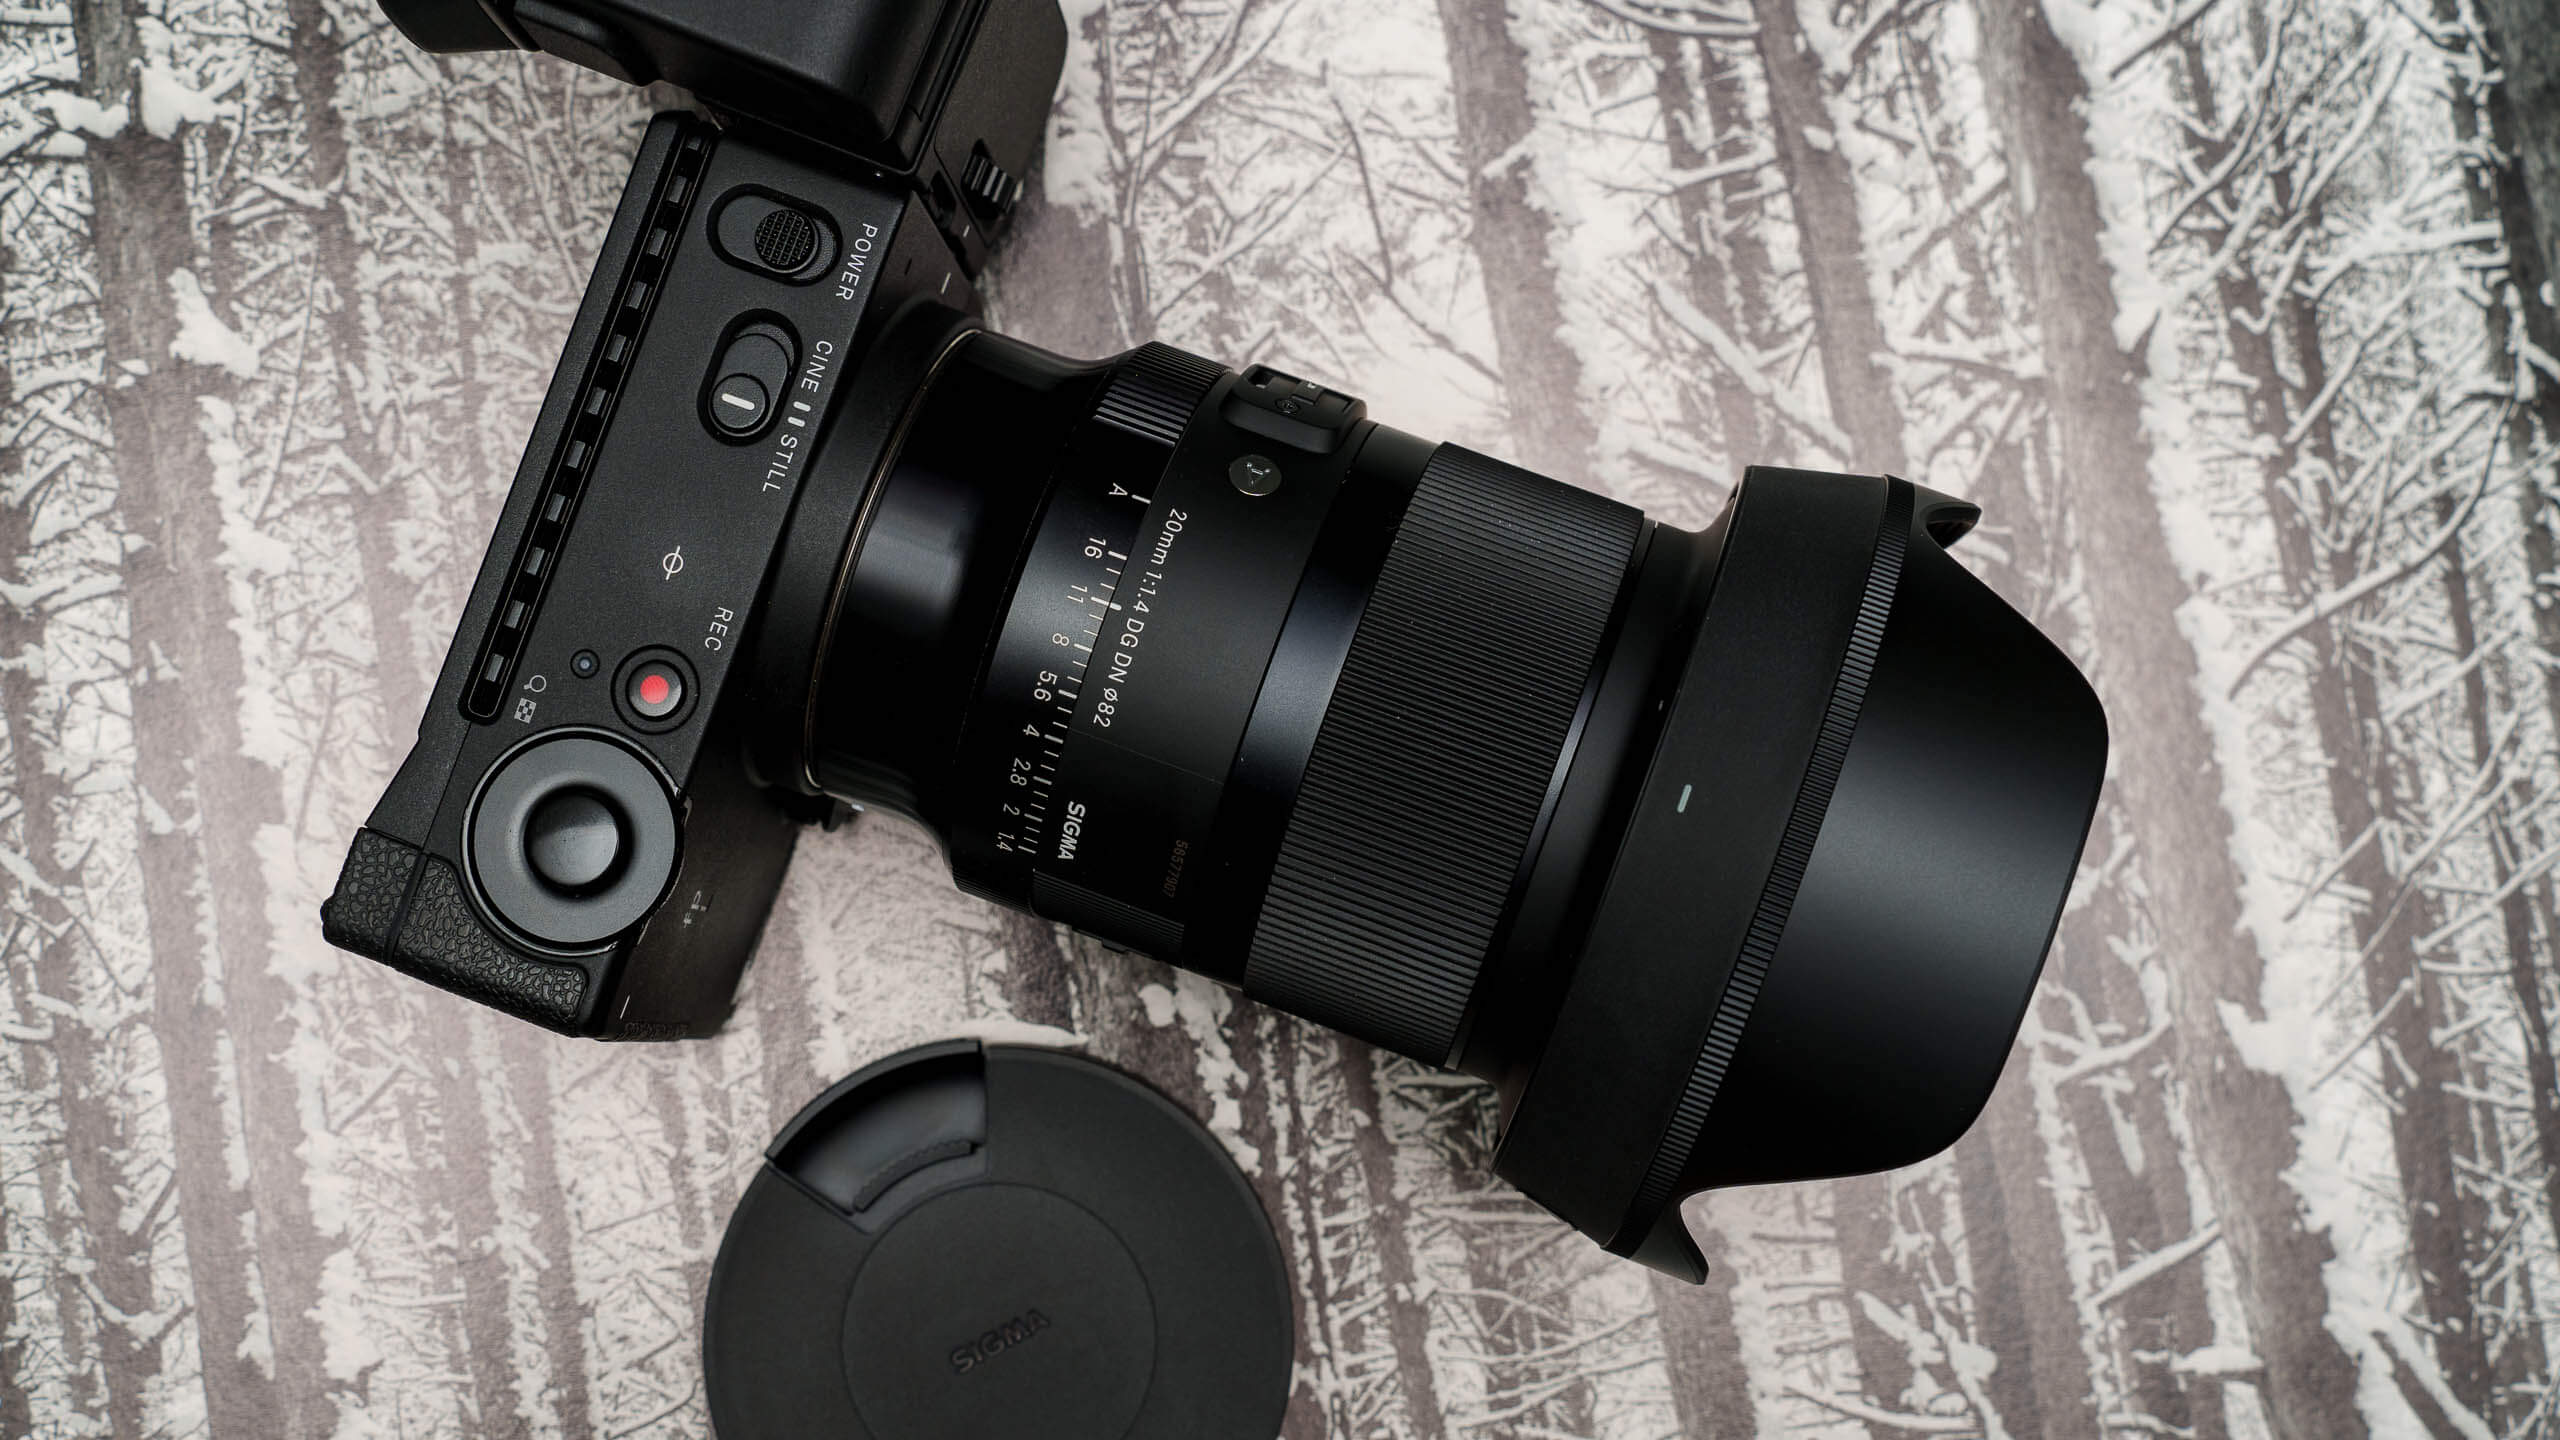 Sigma 20mm f/1.4 Art review: Could this be the perfect mirrorless